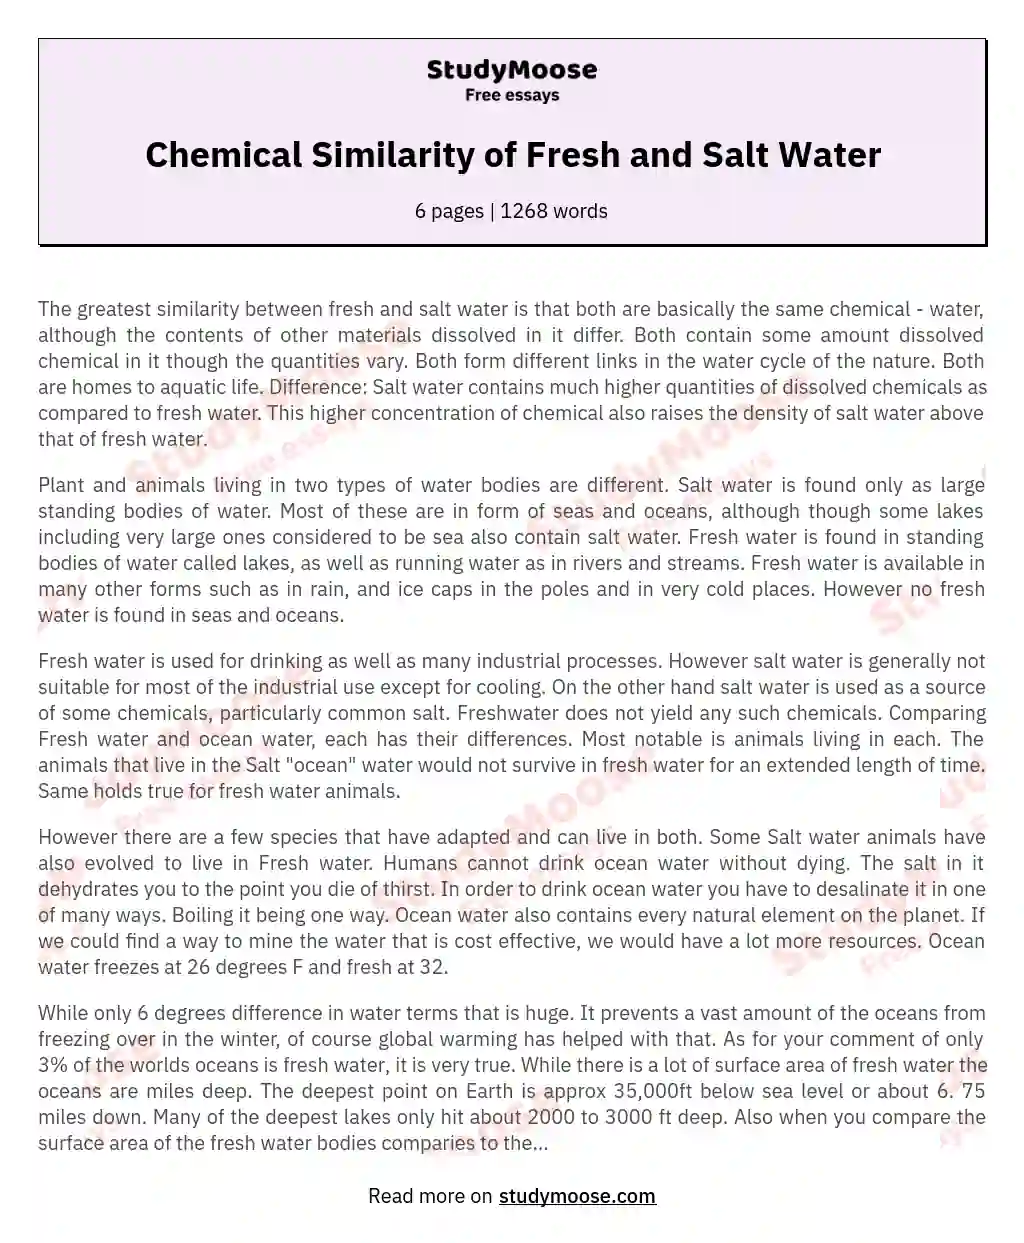 Chemical Similarity of Fresh and Salt Water essay